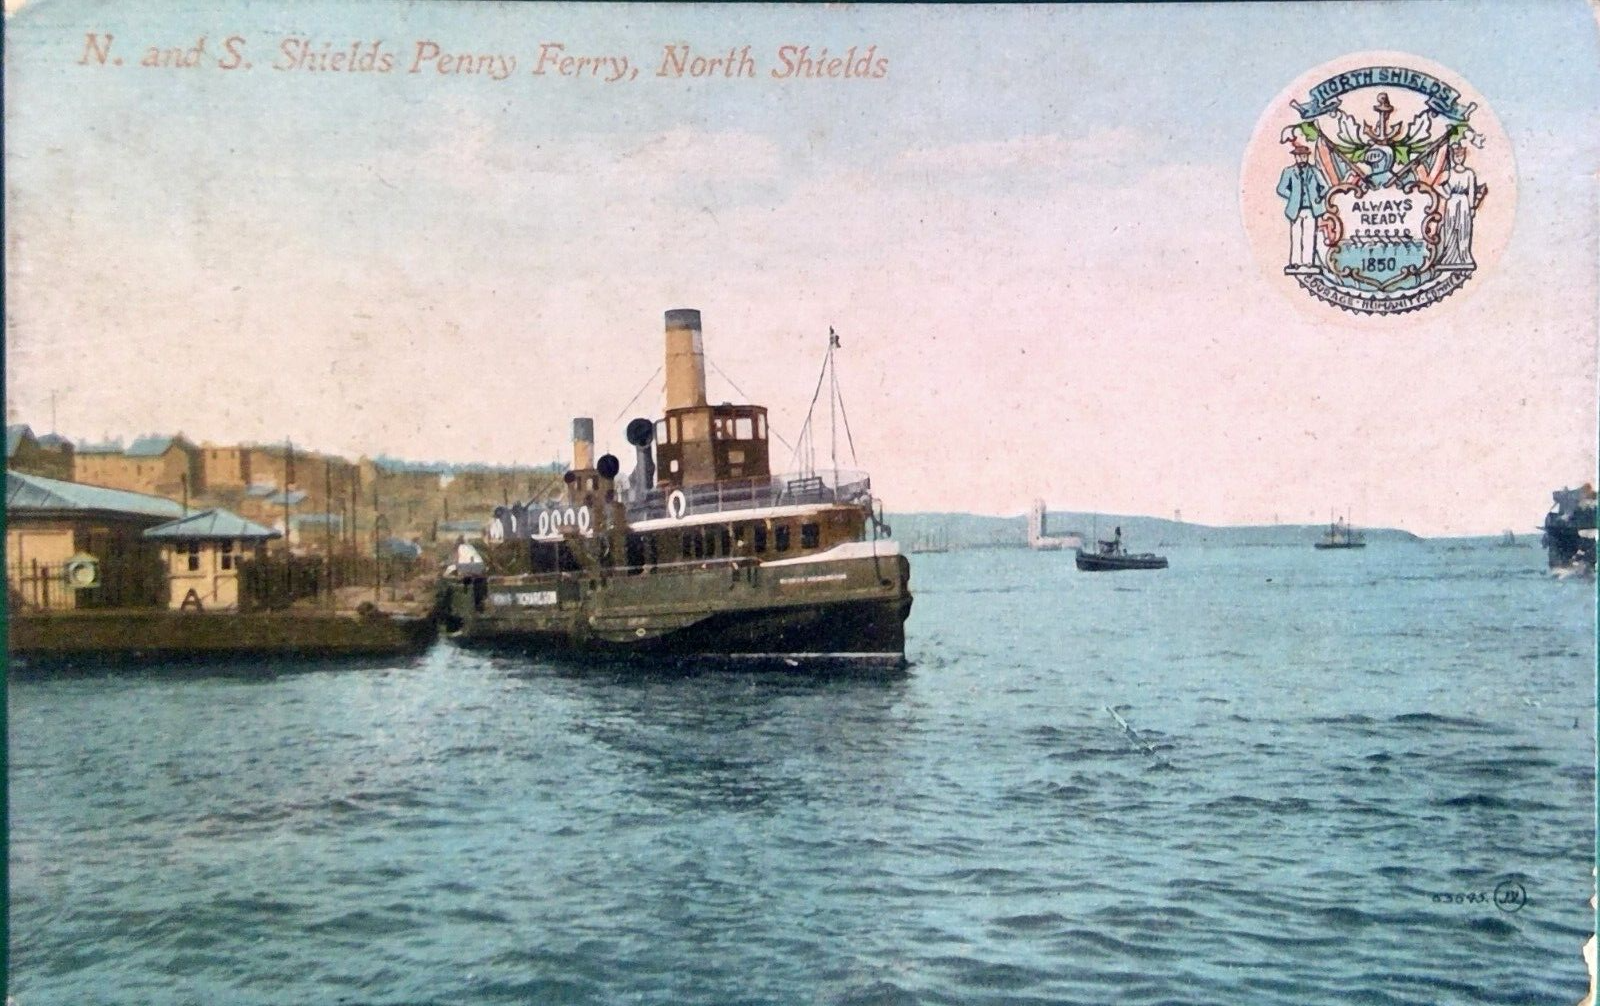 House Clearance - North and South Shields Penny Ferry service.